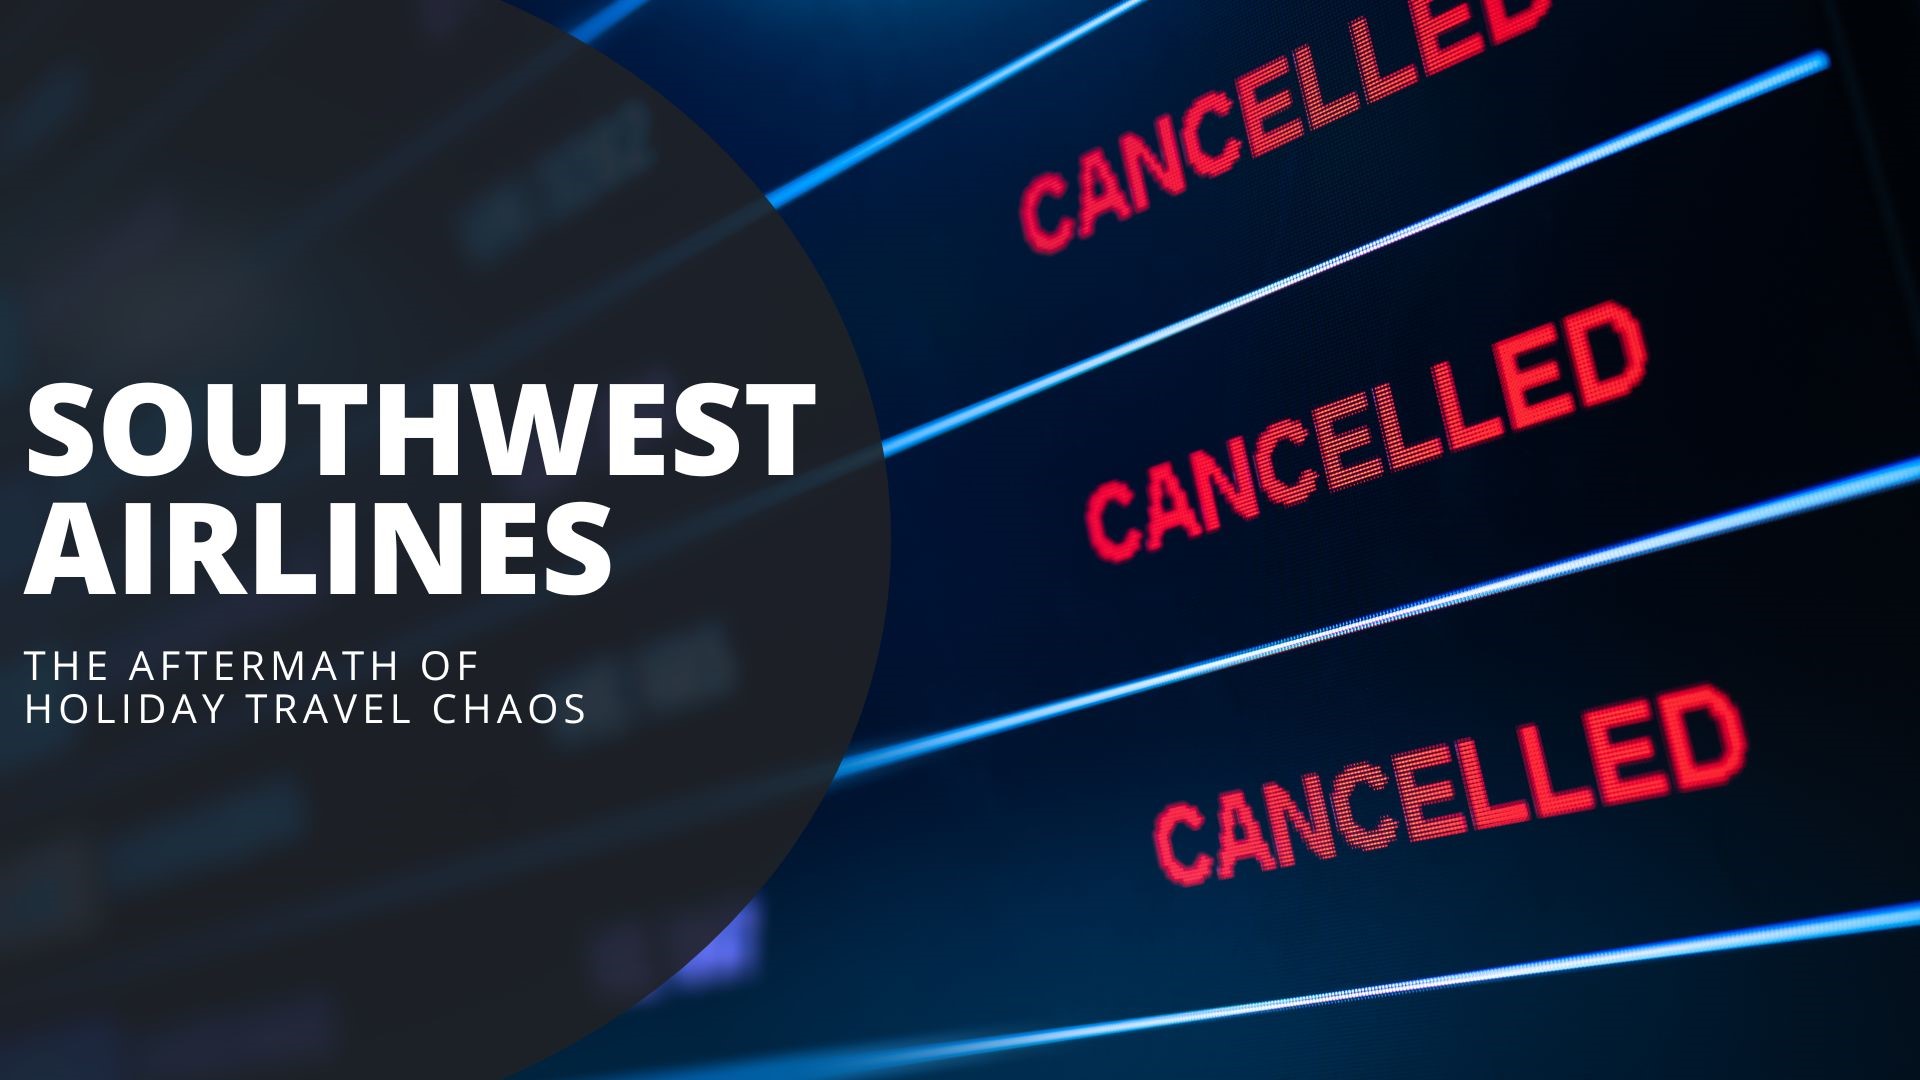 From lost luggage to waiting for refunds, the fallout continues for Southwest airlines and its customers. The latest on the holiday travel chaos.